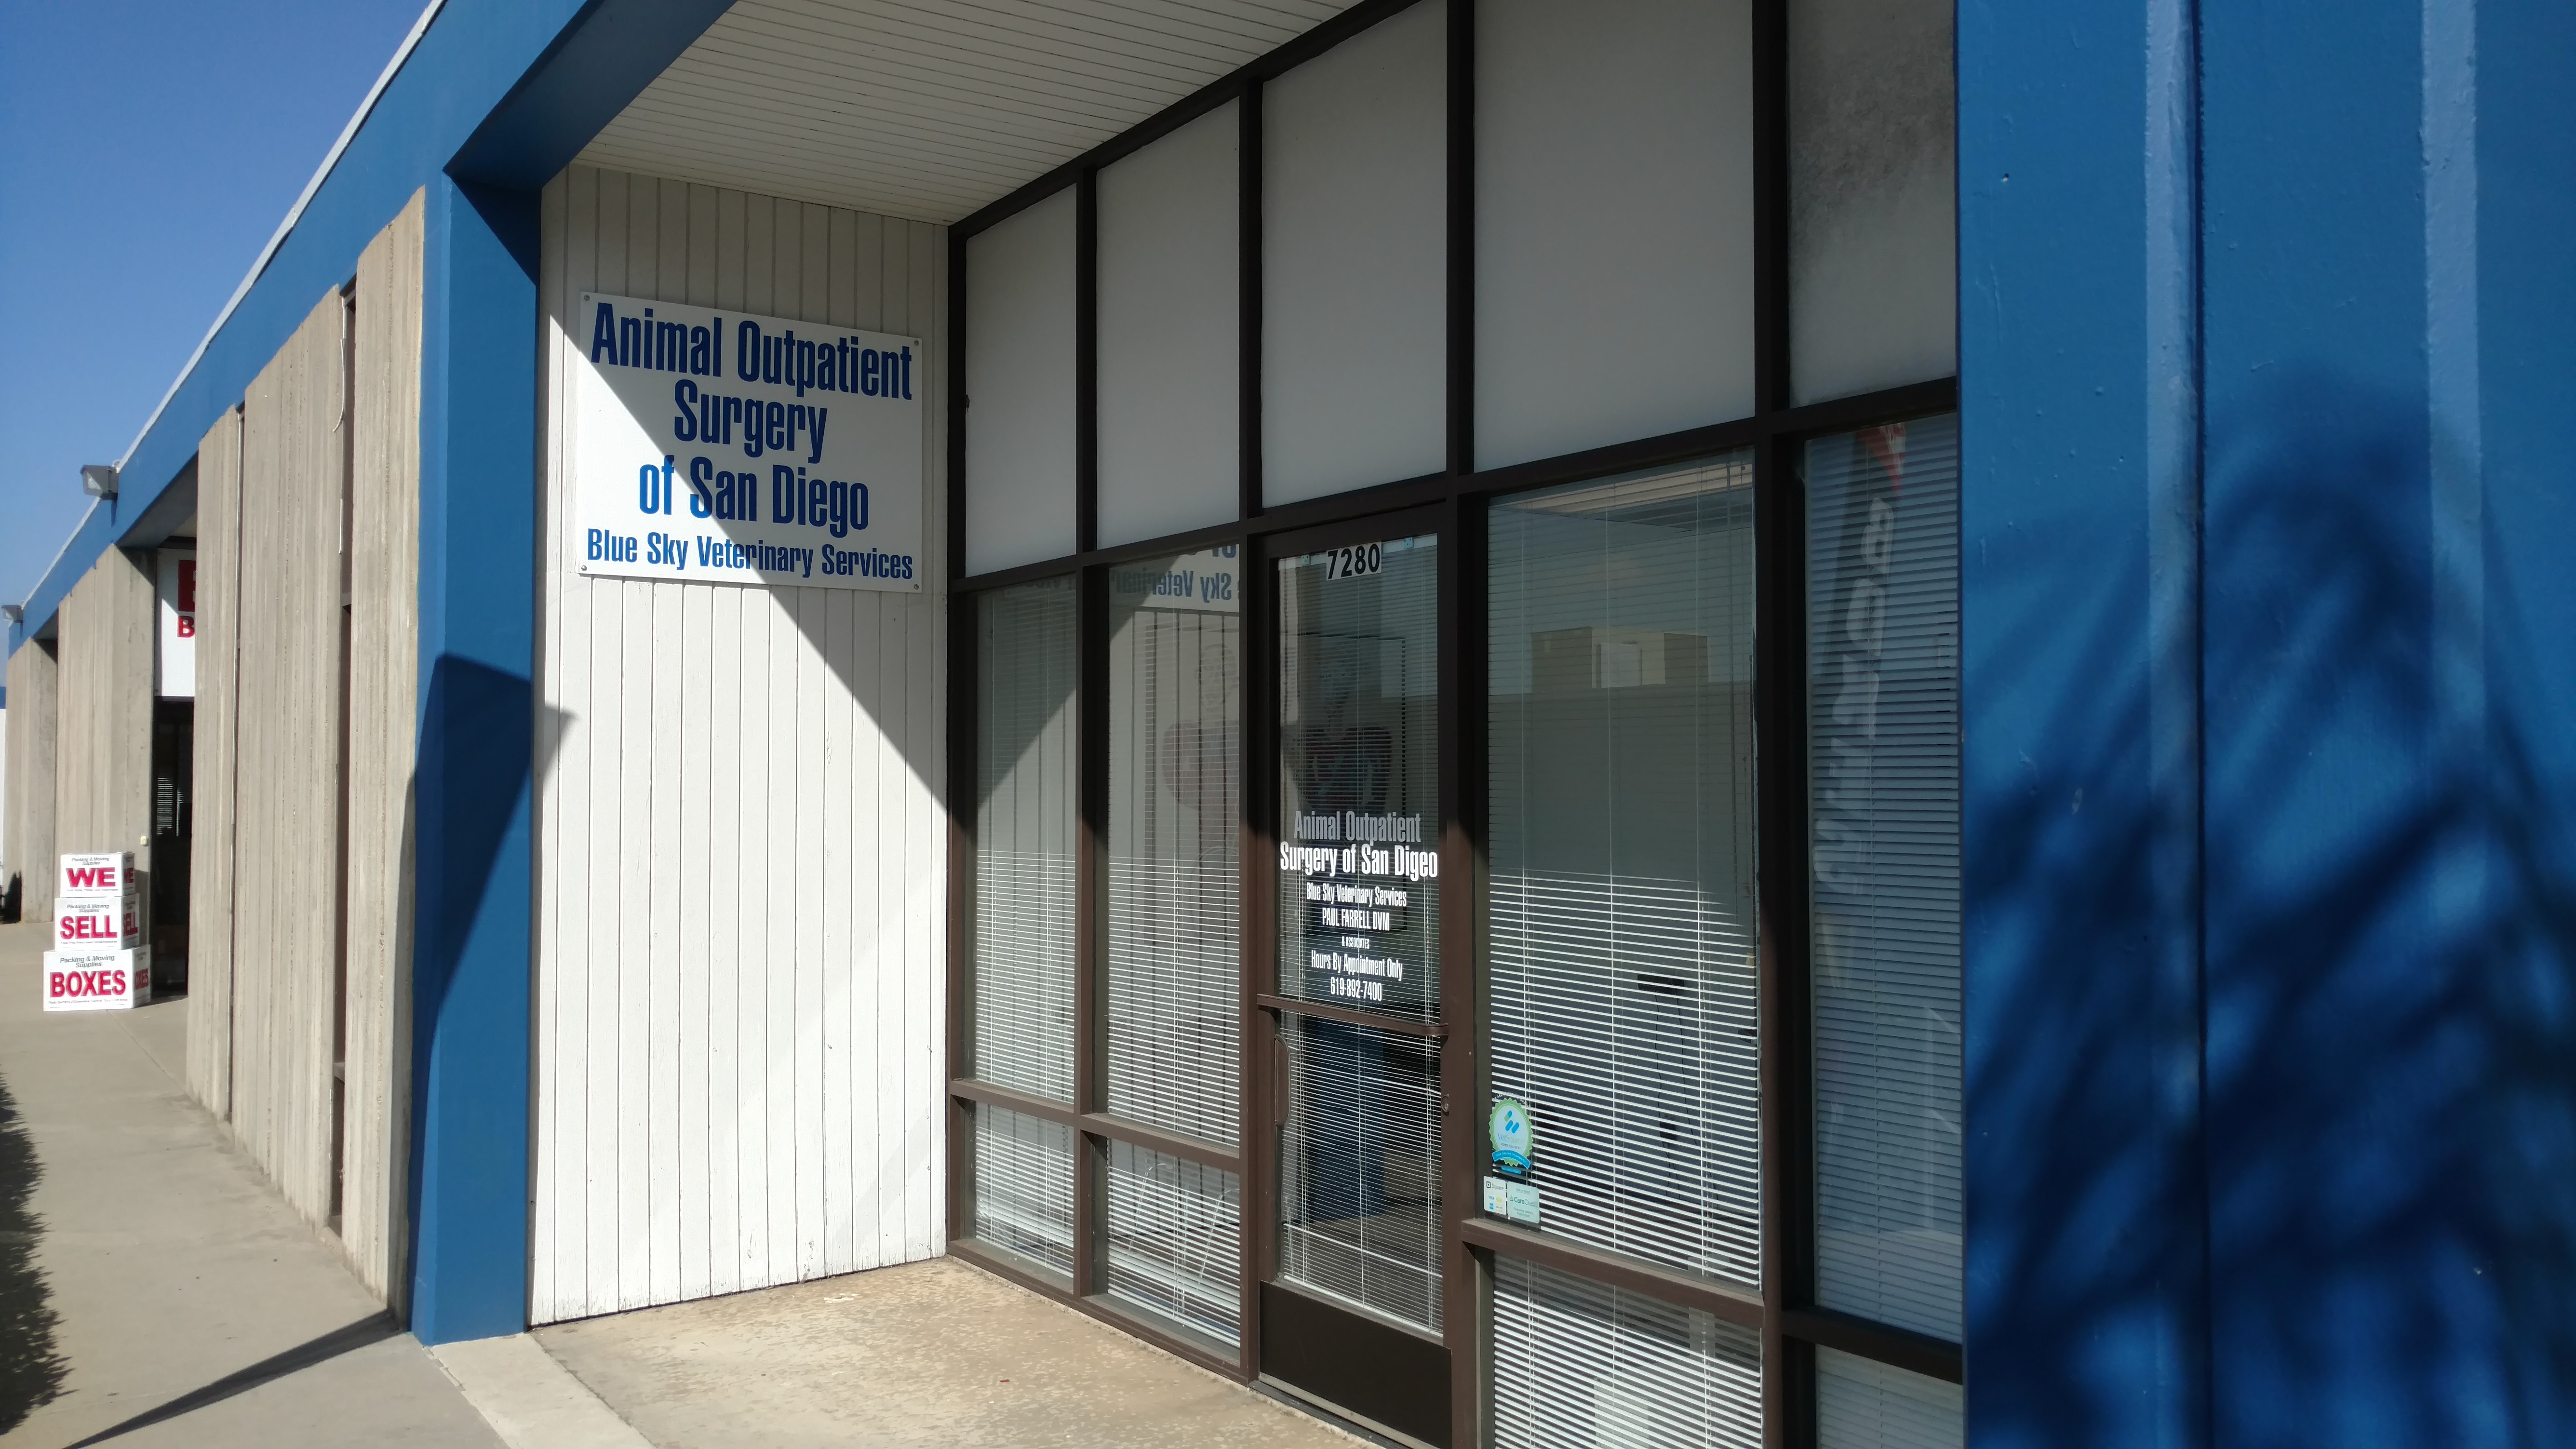 Animal Outpatient Surgery of San Diego and Blue Sky Veterinary Services, Inc.